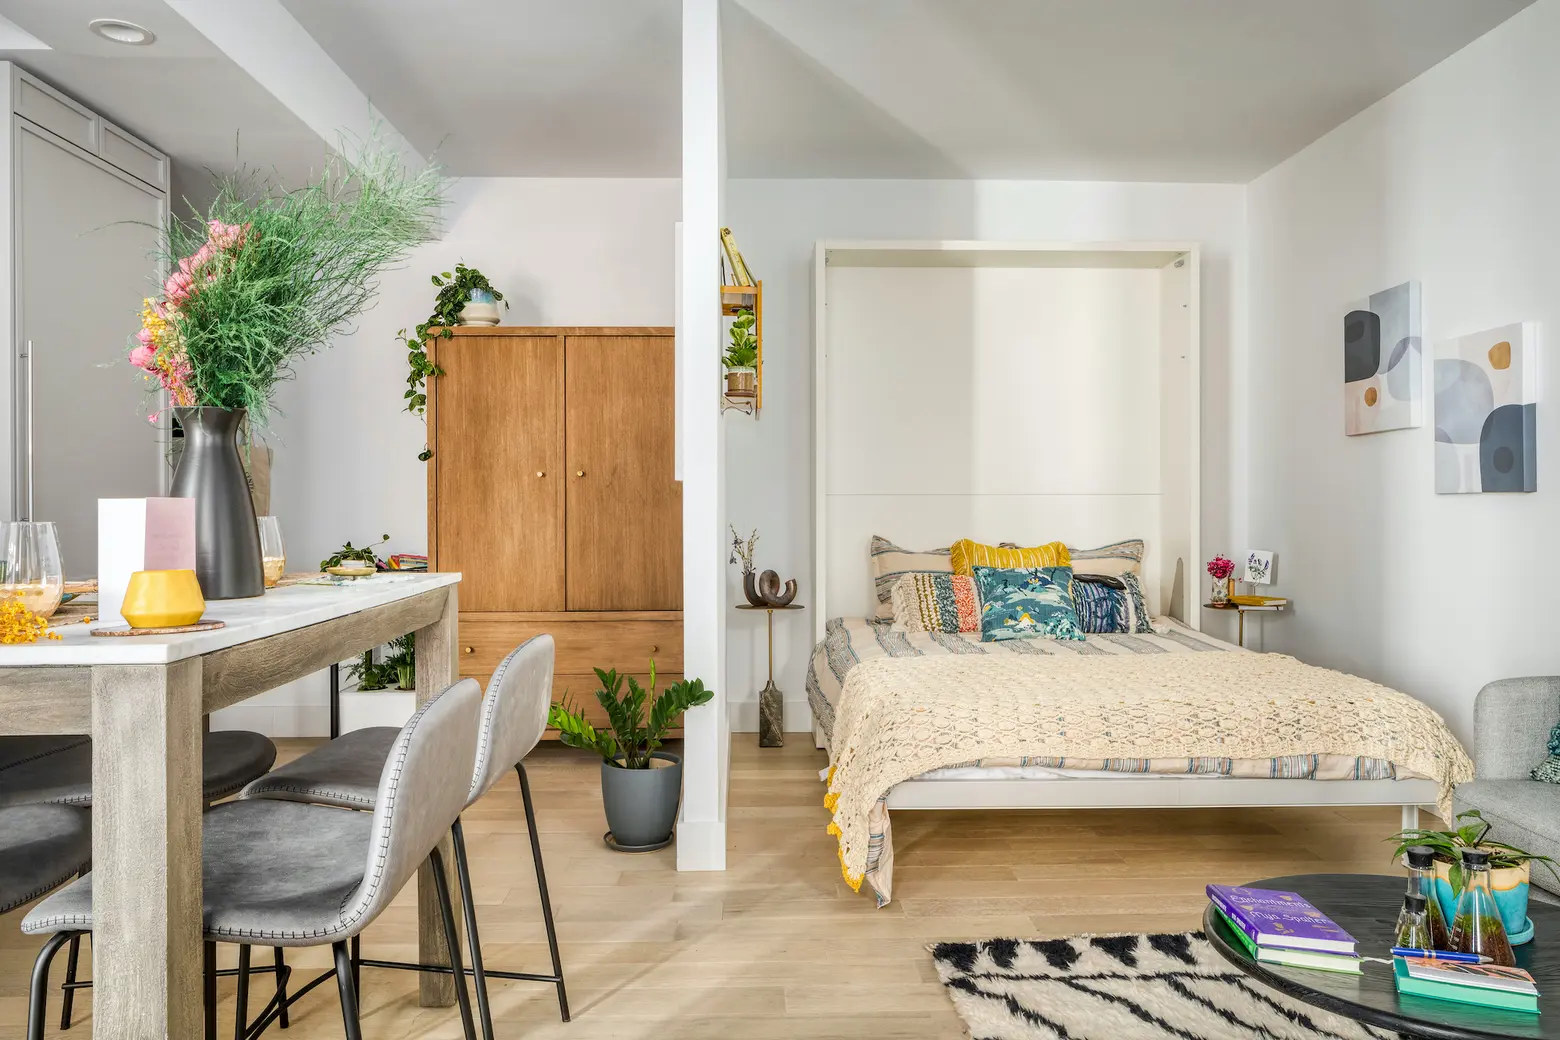 $499K Crown Heights condo got a makeover from a major plant influencer